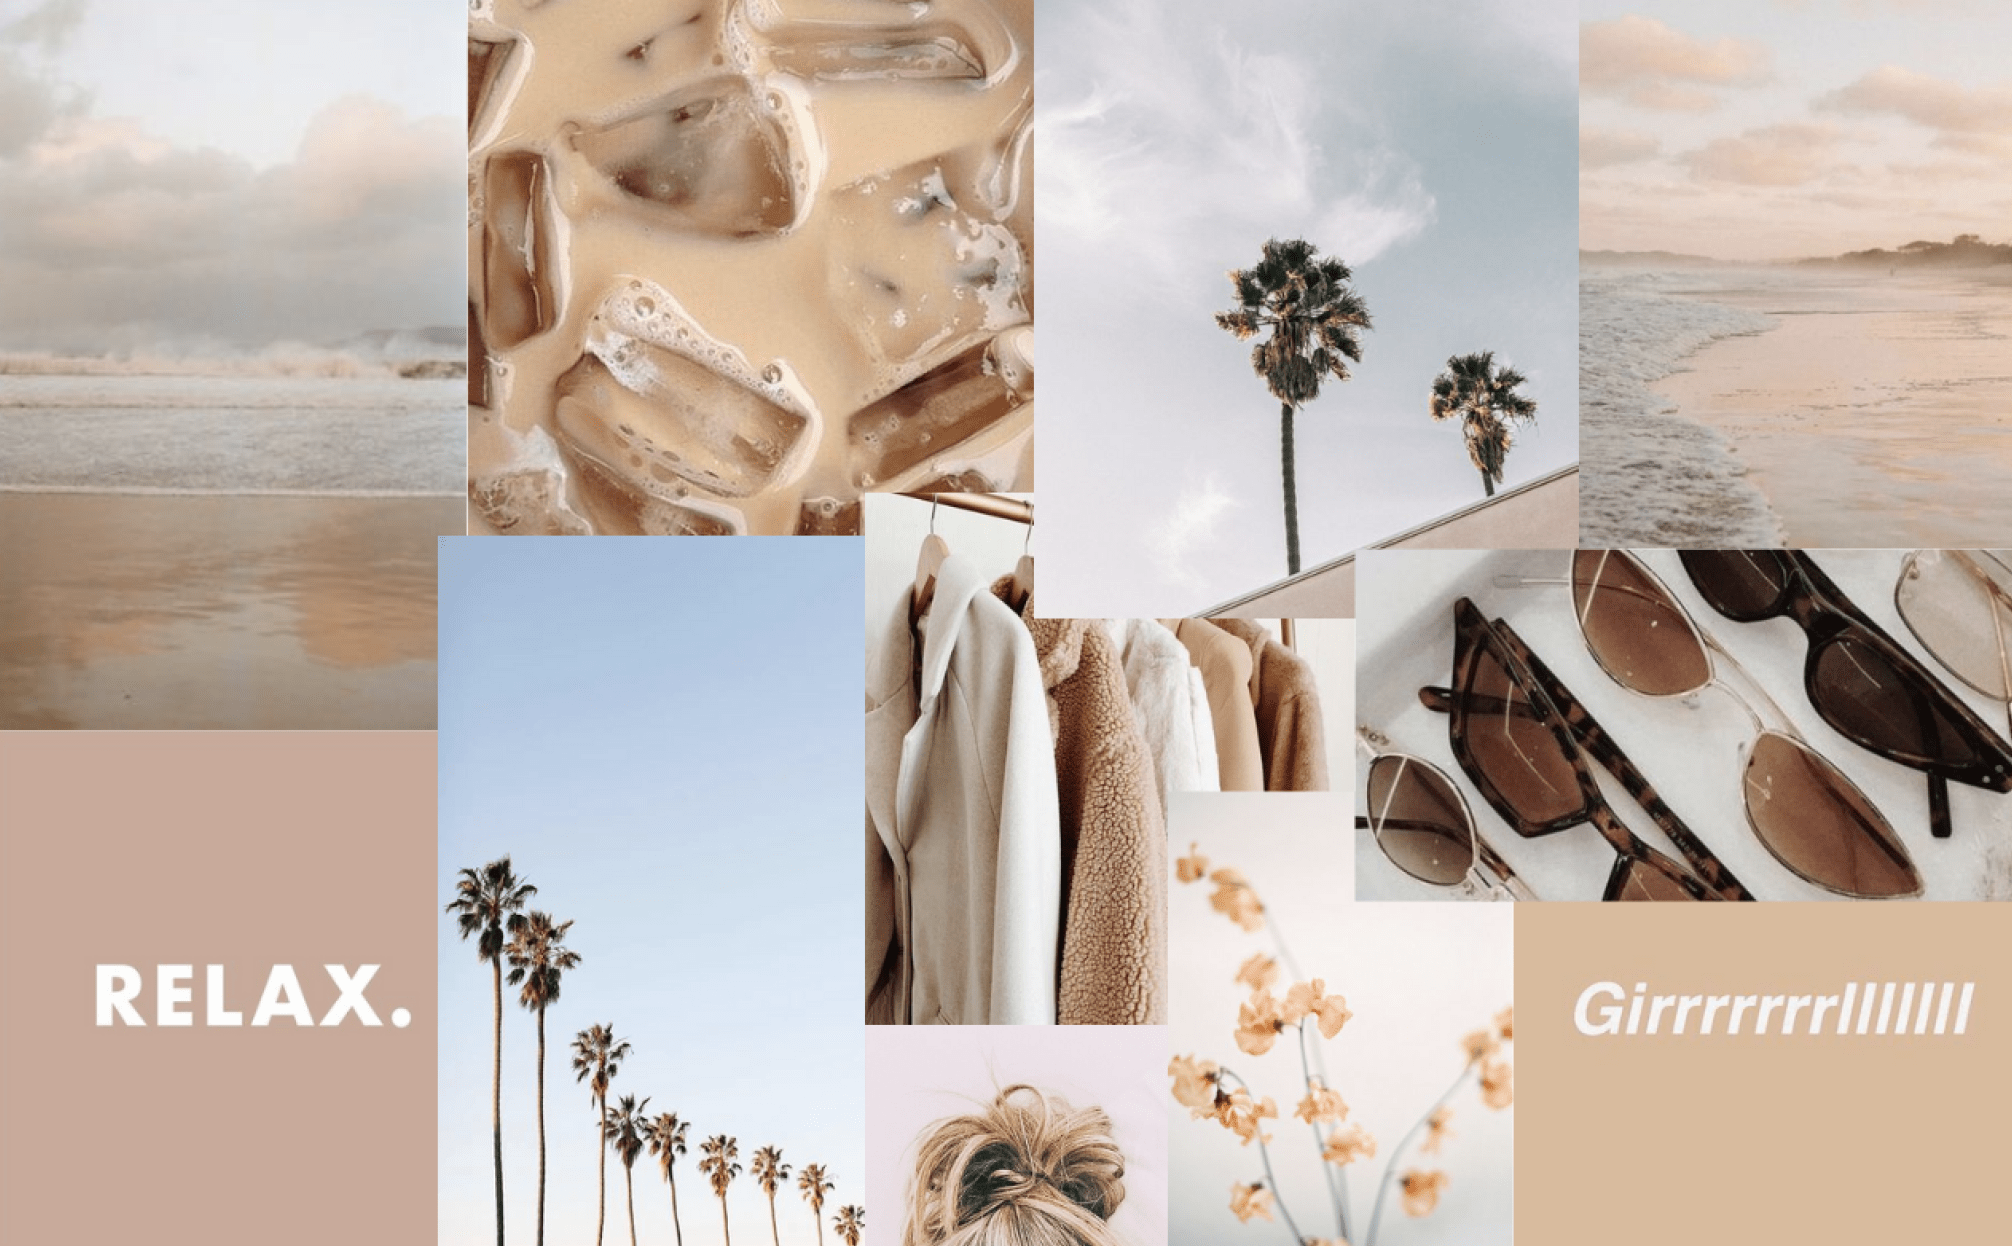 A collage of pictures with palm trees and sand - MacBook